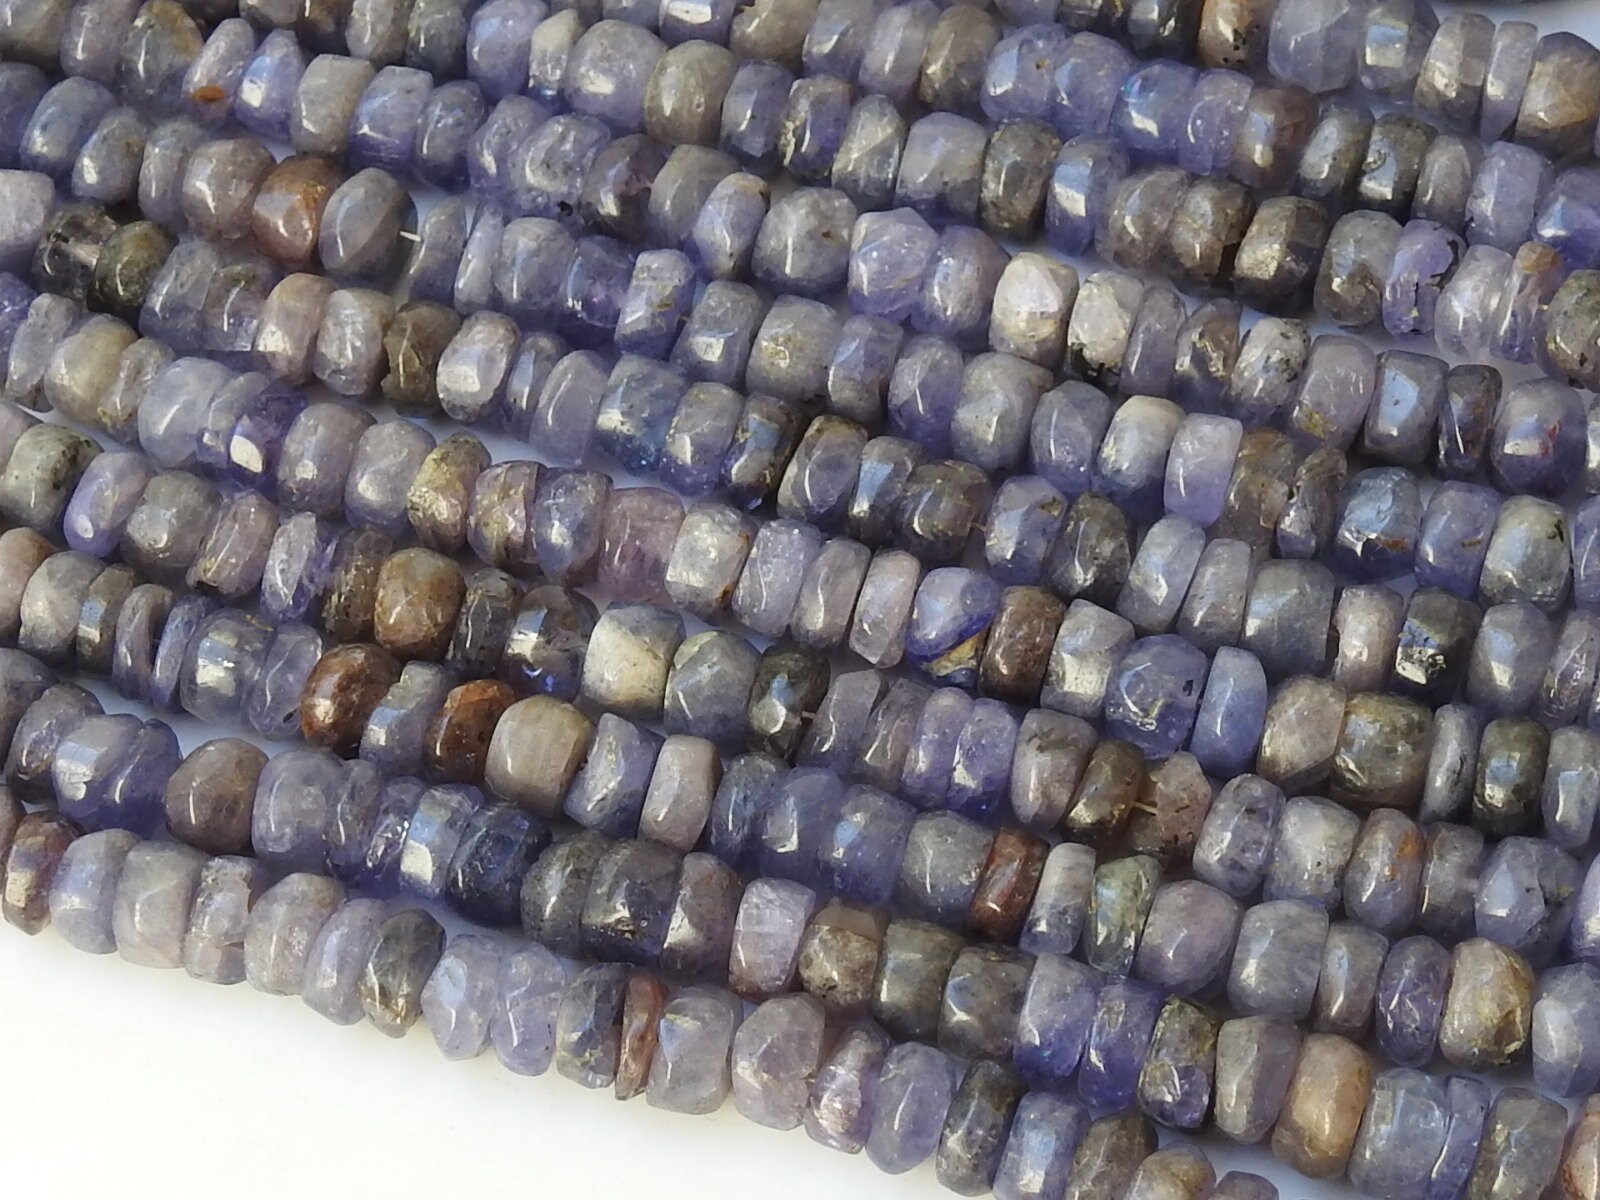 Tanzanite Smooth Roundel Beads,Loose Stone,Handmade,For Making Jewelry,Wholesale Price,New Arrival,16Inch Strand,100%Natural B8 | Save 33% - Rajasthan Living 15